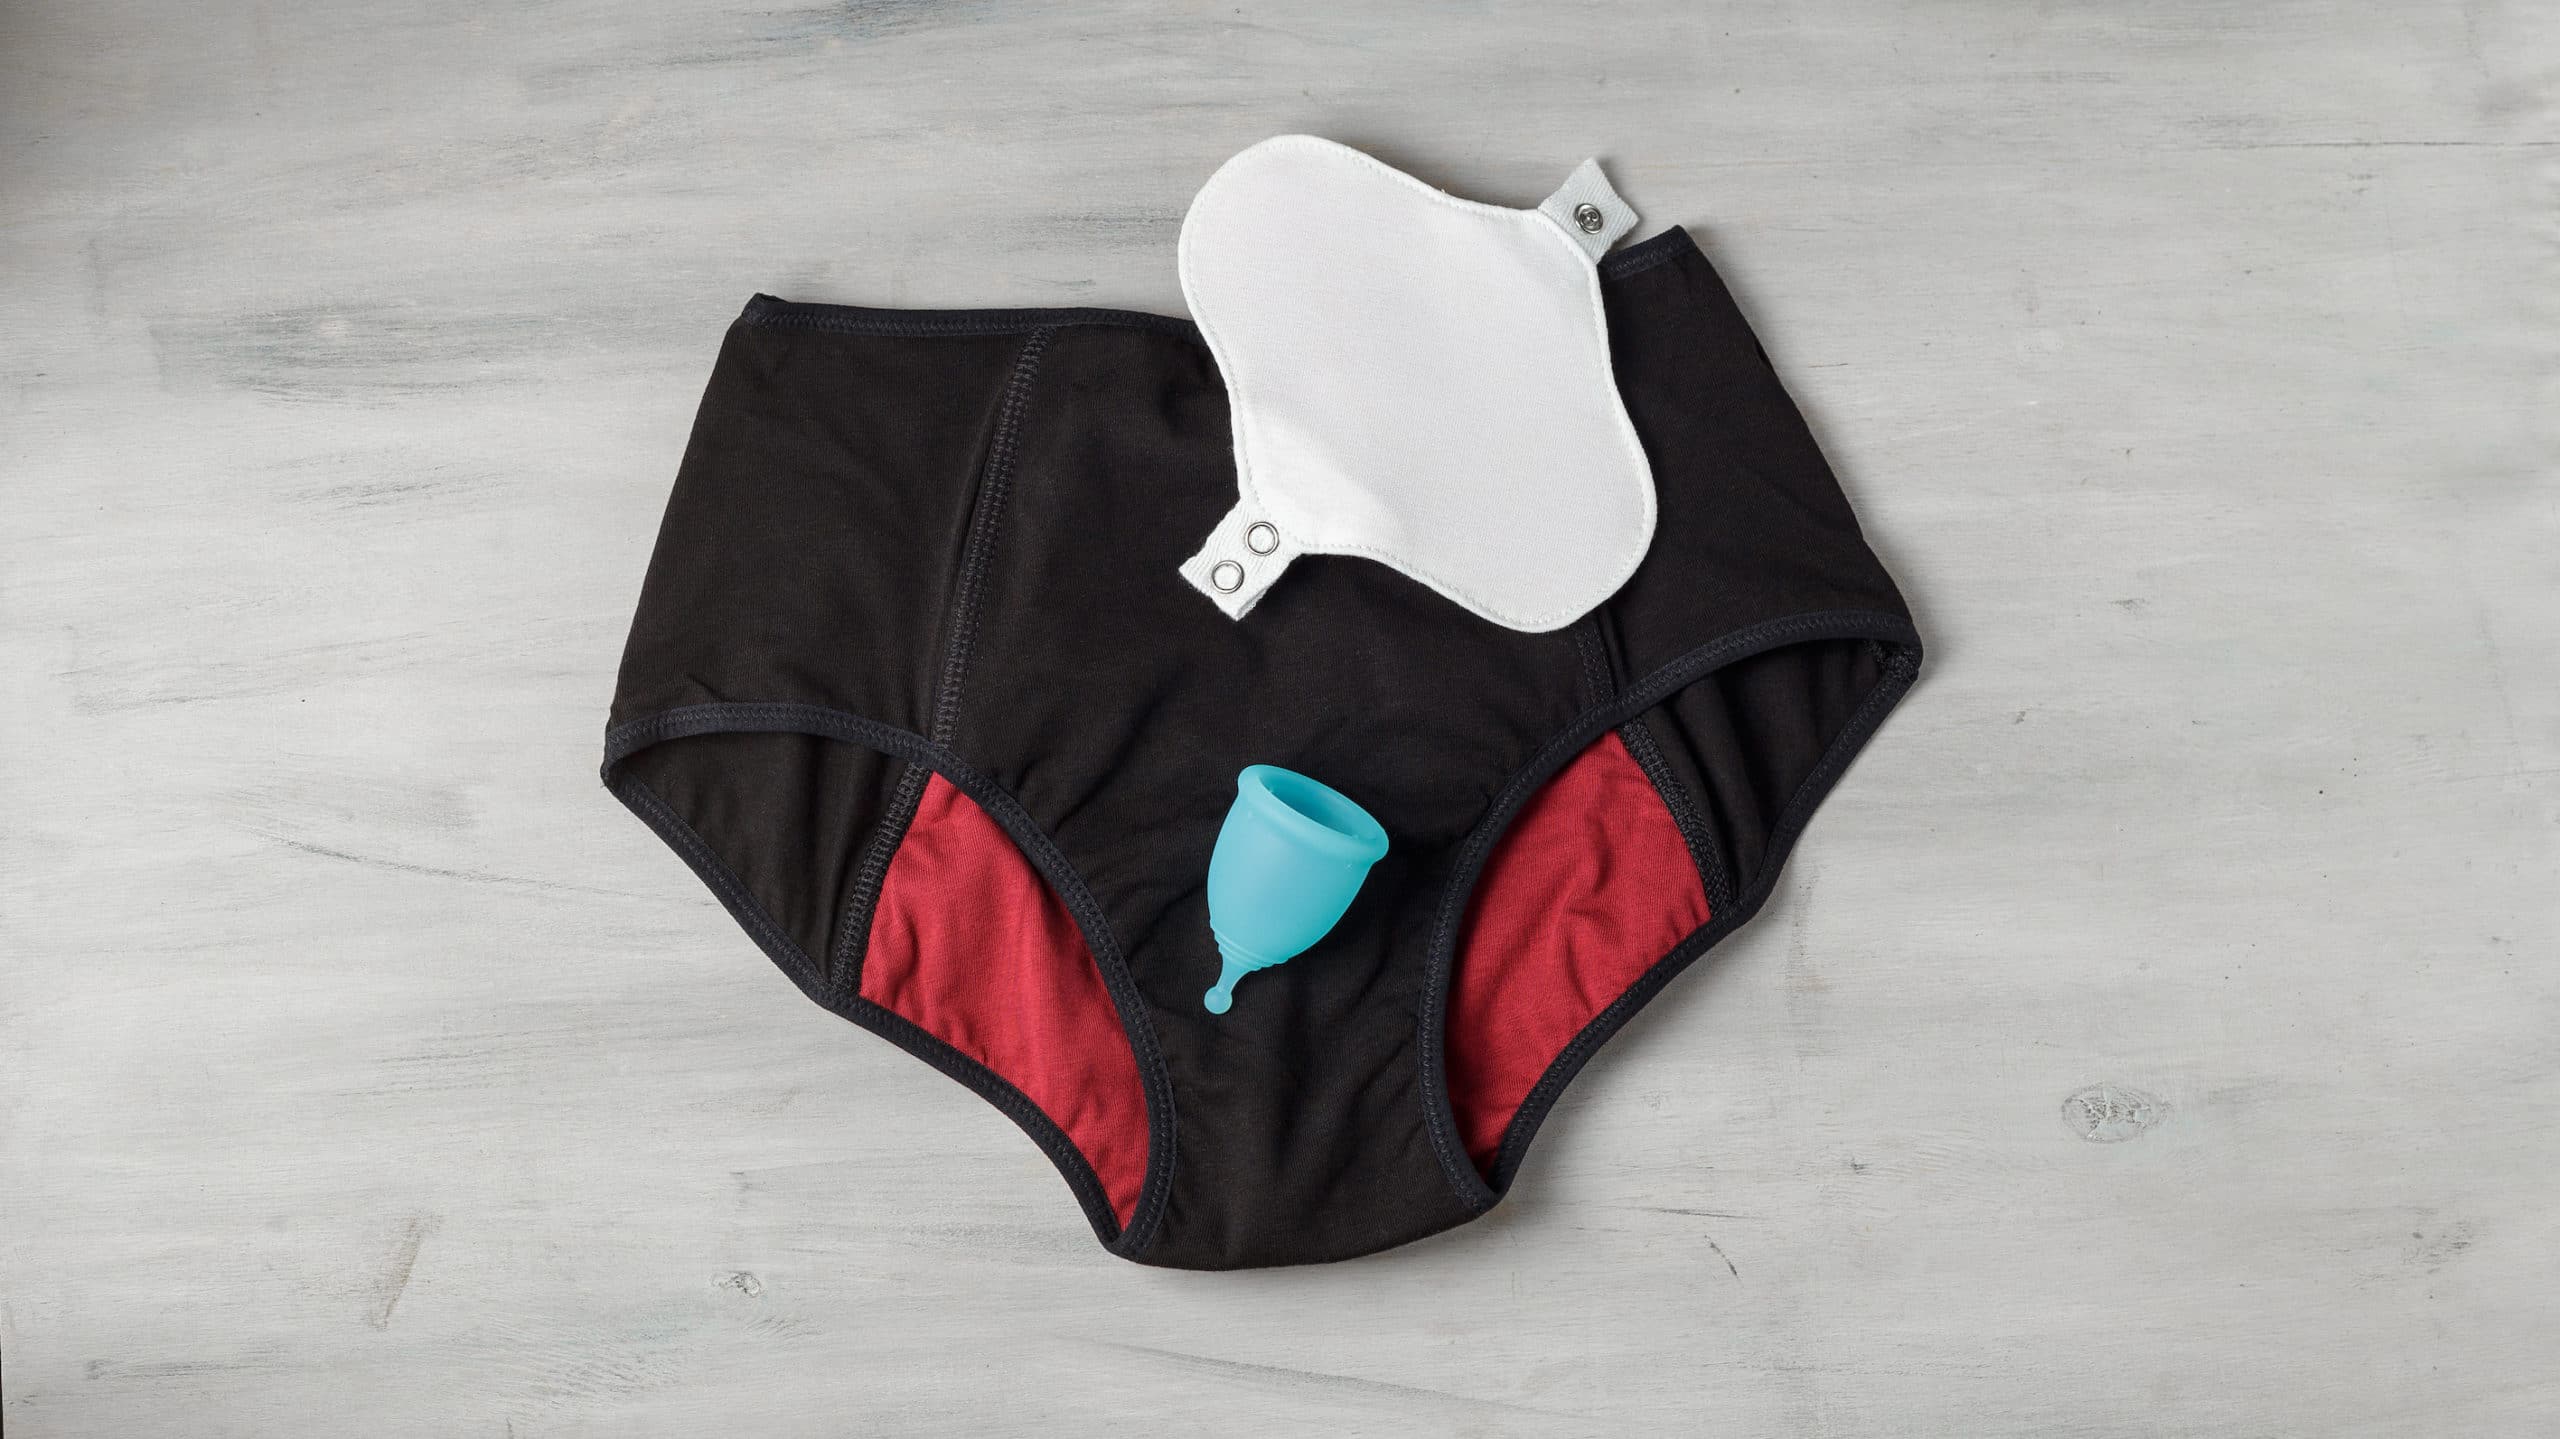 Reusable eco-friendly feminine hygiene period products - menstrual cup and black menstruation pants and organic cotton cloth everyday pad. Top view on grey background.